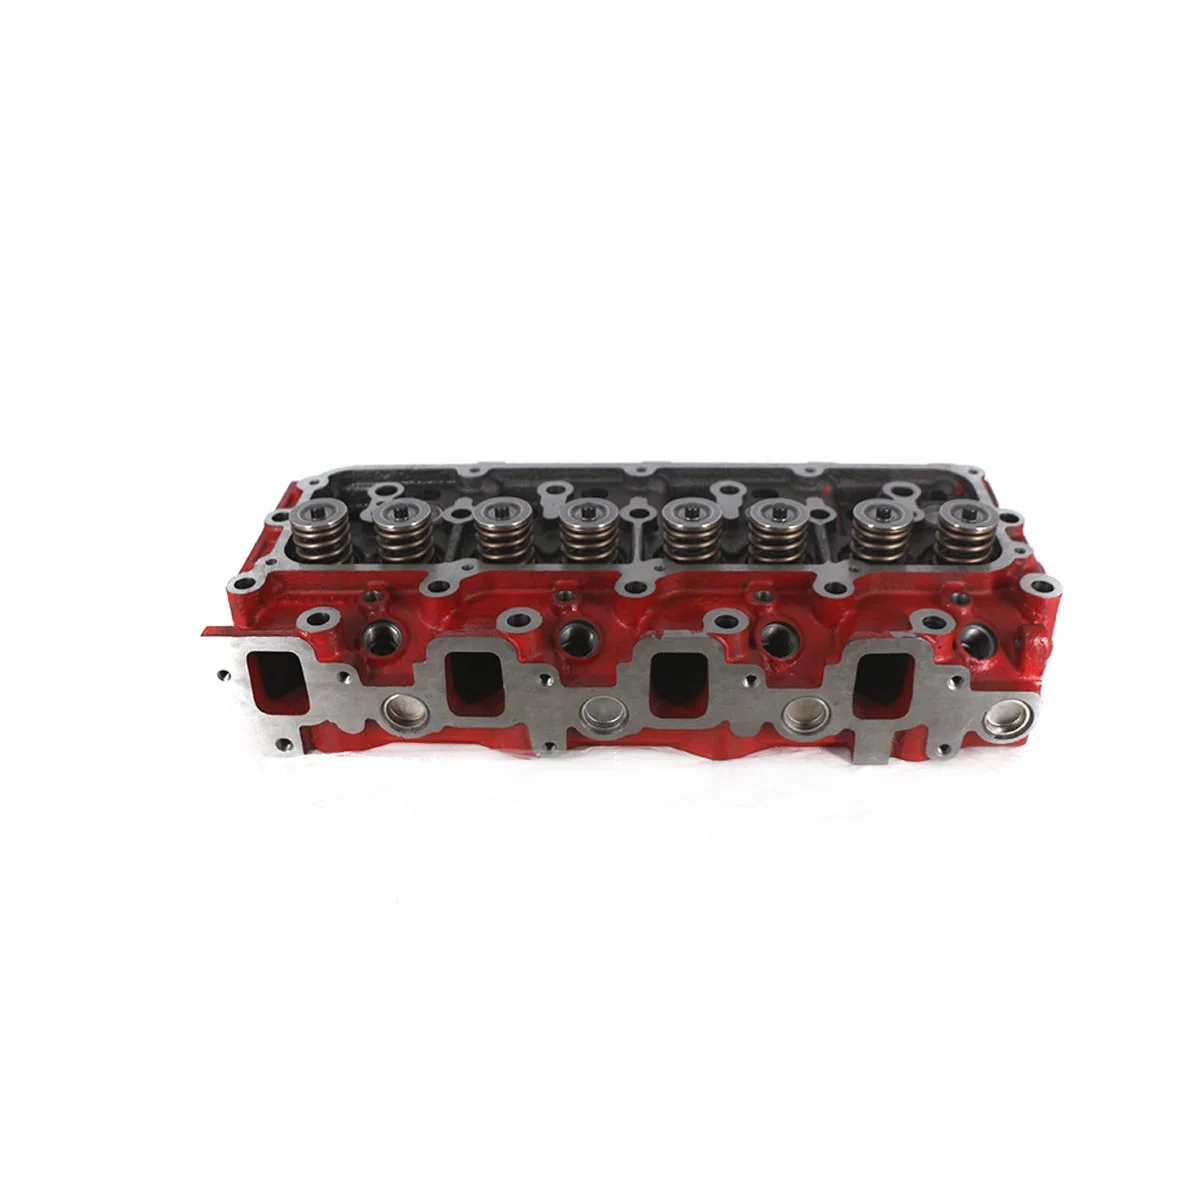 

HEADBOK Diesel Engine Car Assembly J2 Complete Cylinder Head With Valve Camshaft Engine Spare Part for KIA without Rocker Arm